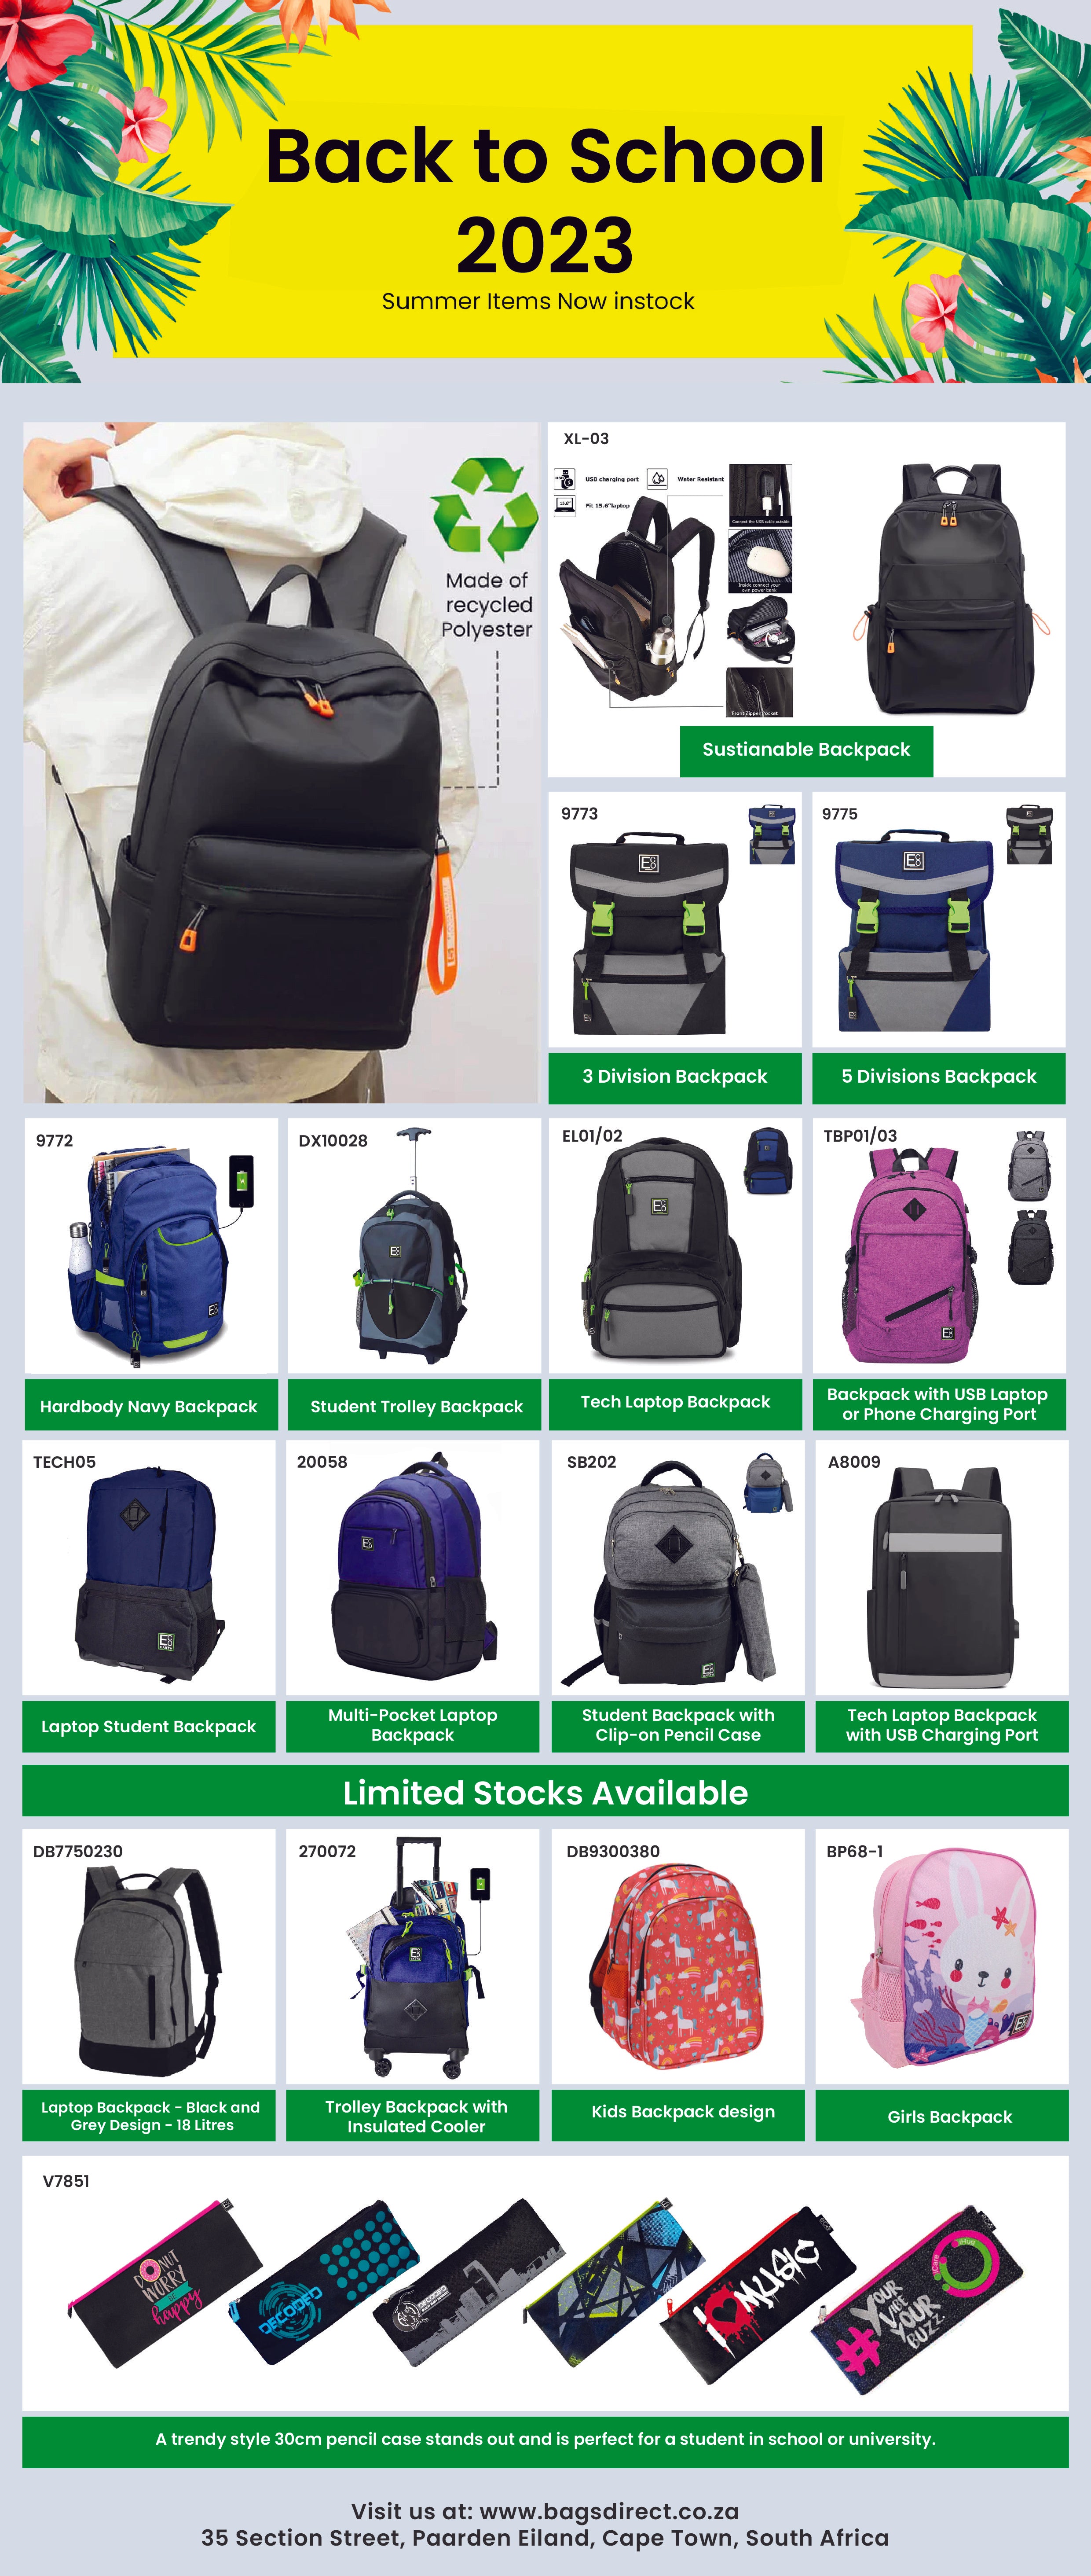 Eco-Friendly Backpacks: A Stylish and Sustainable Choice for Back to School